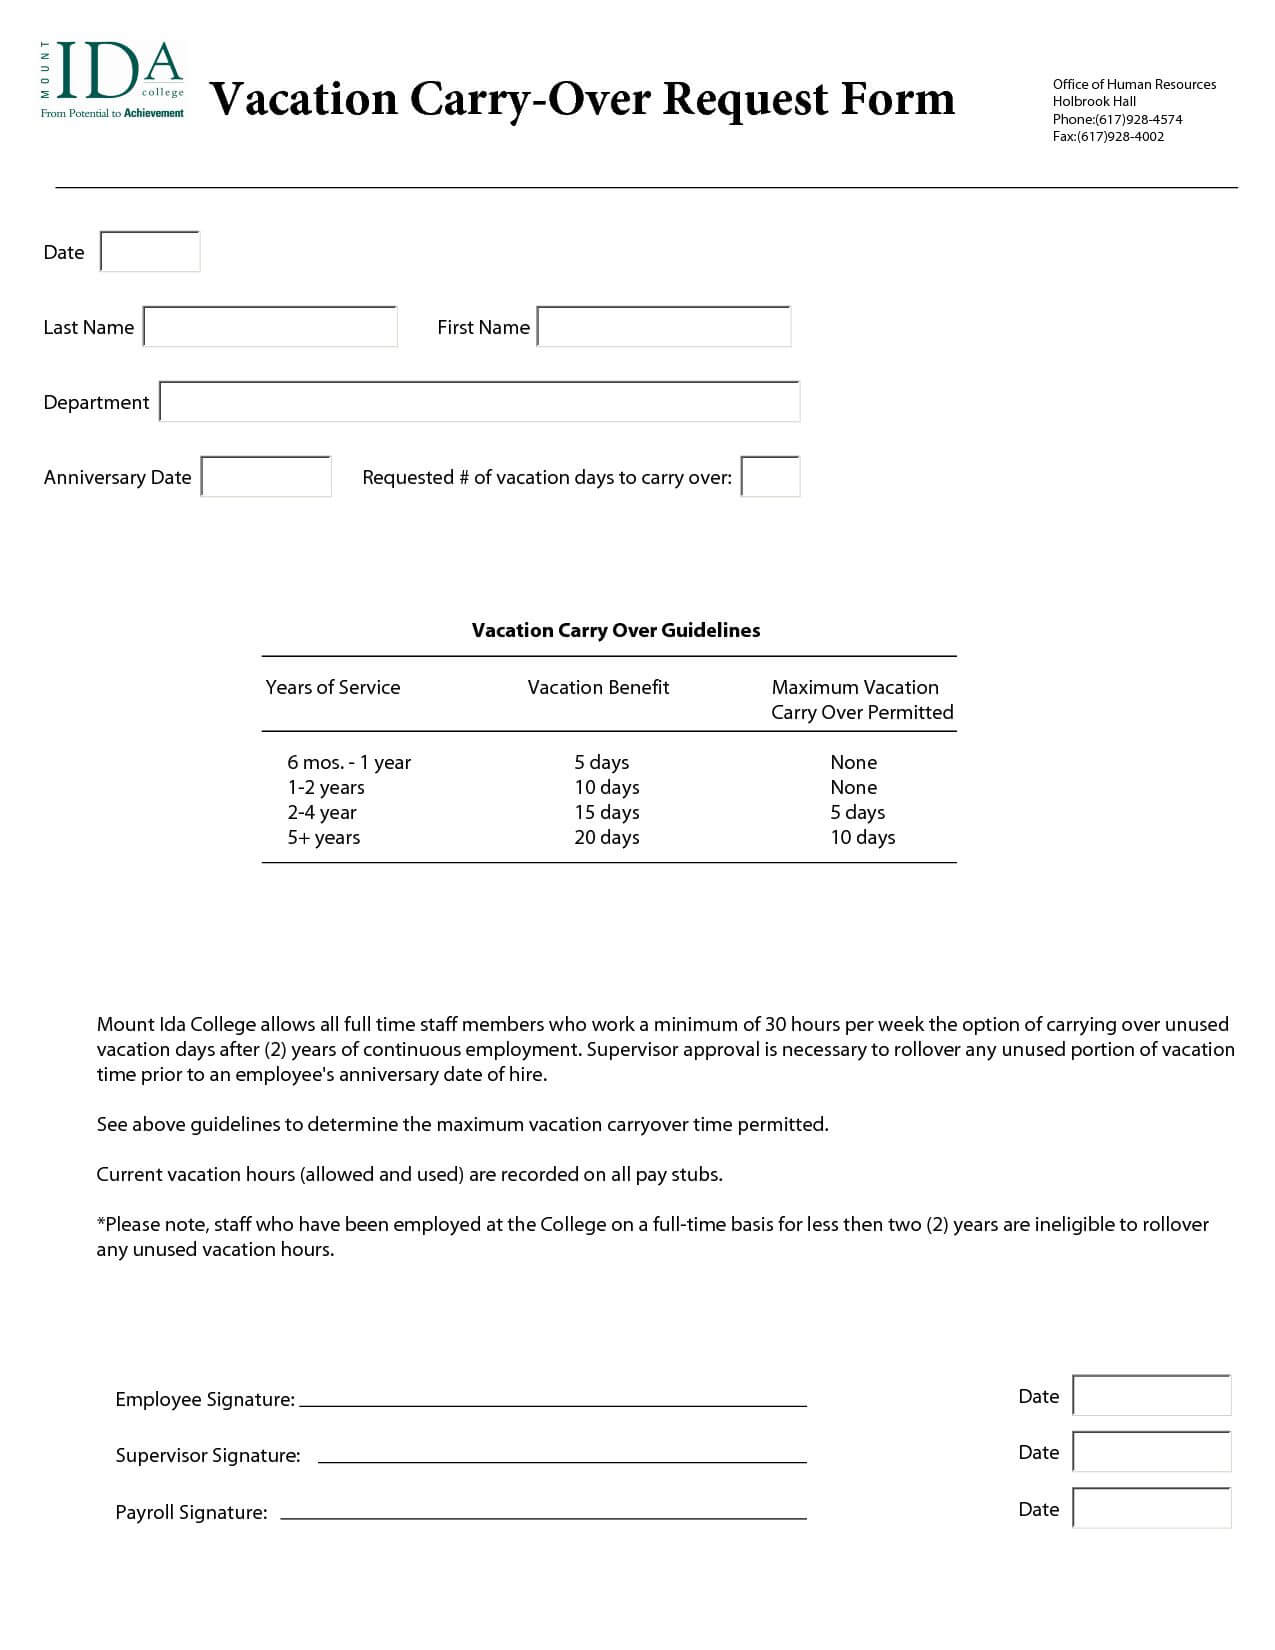 Travel Request Form Template Excel Or Annual Leave Request Regarding Travel Request Form Template Word